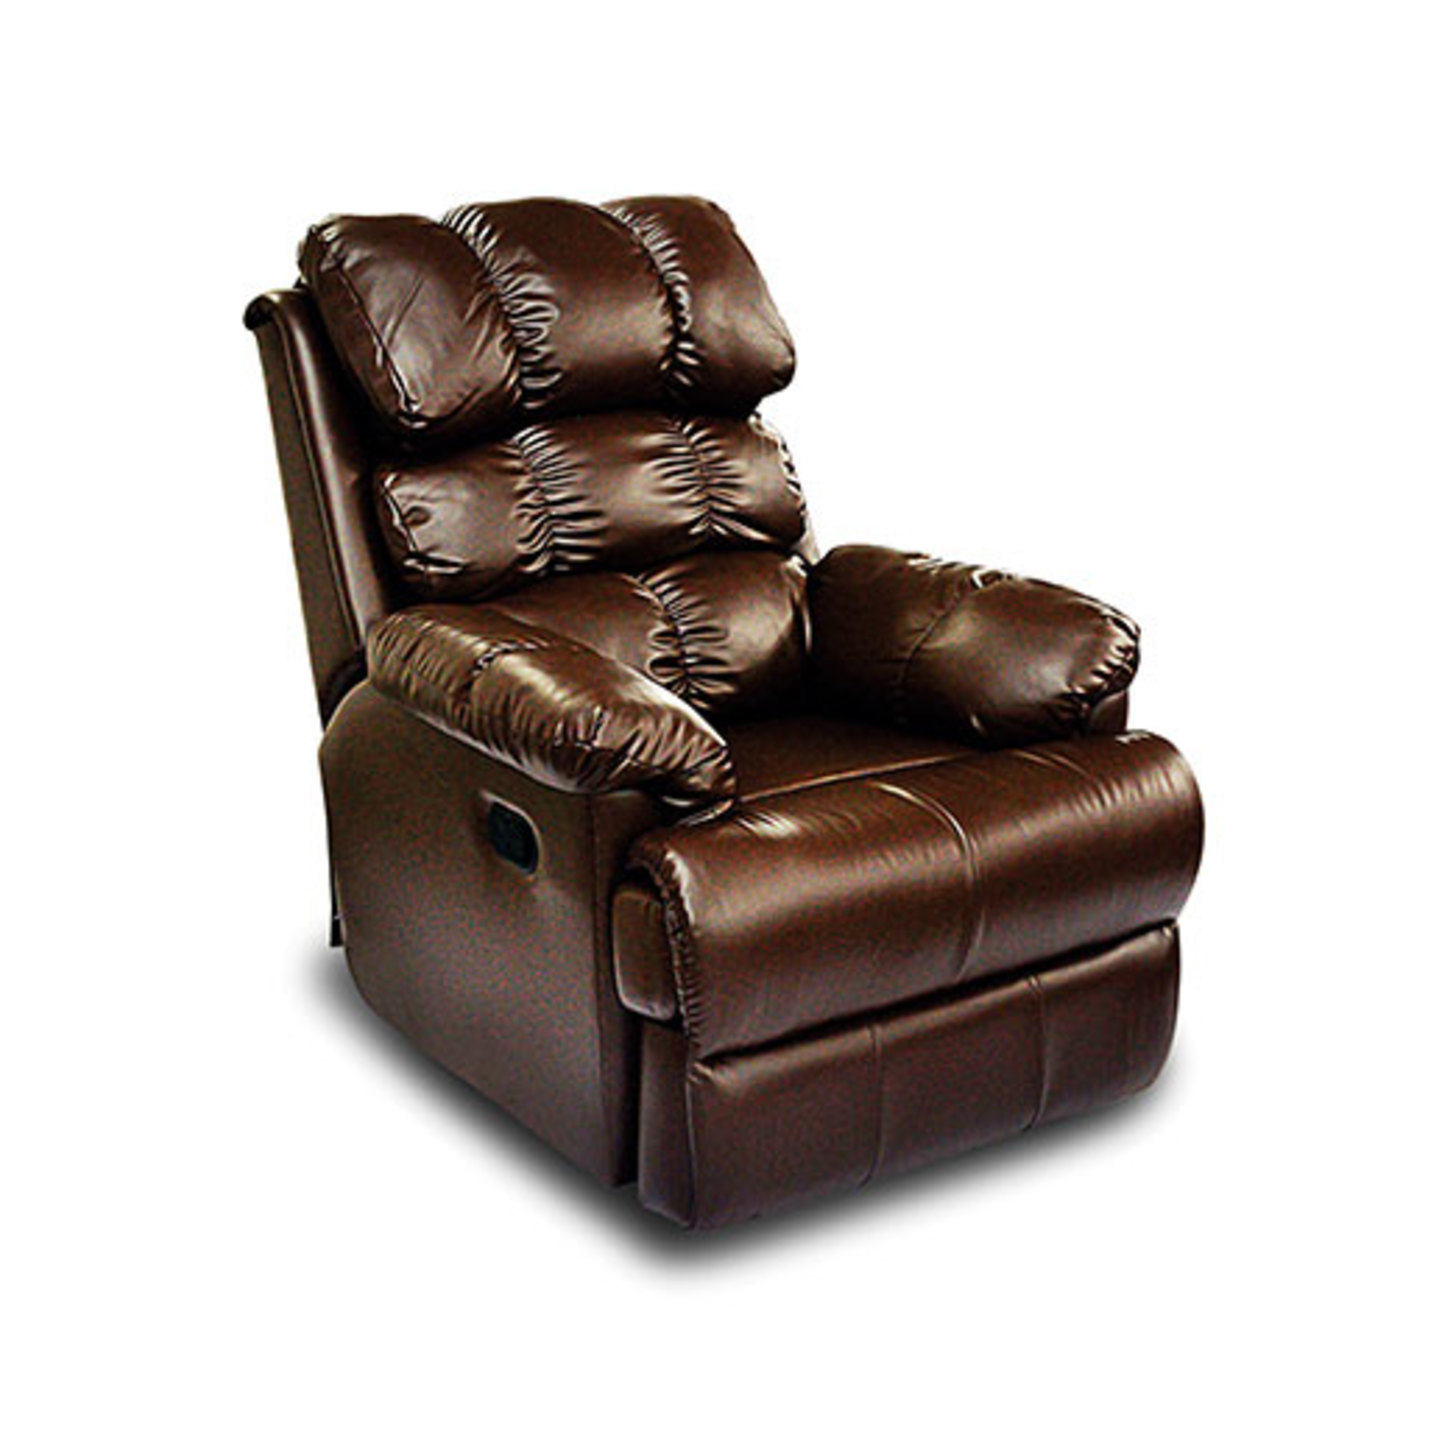 LN Recliner Chair Amet Manual System In Brown Colour